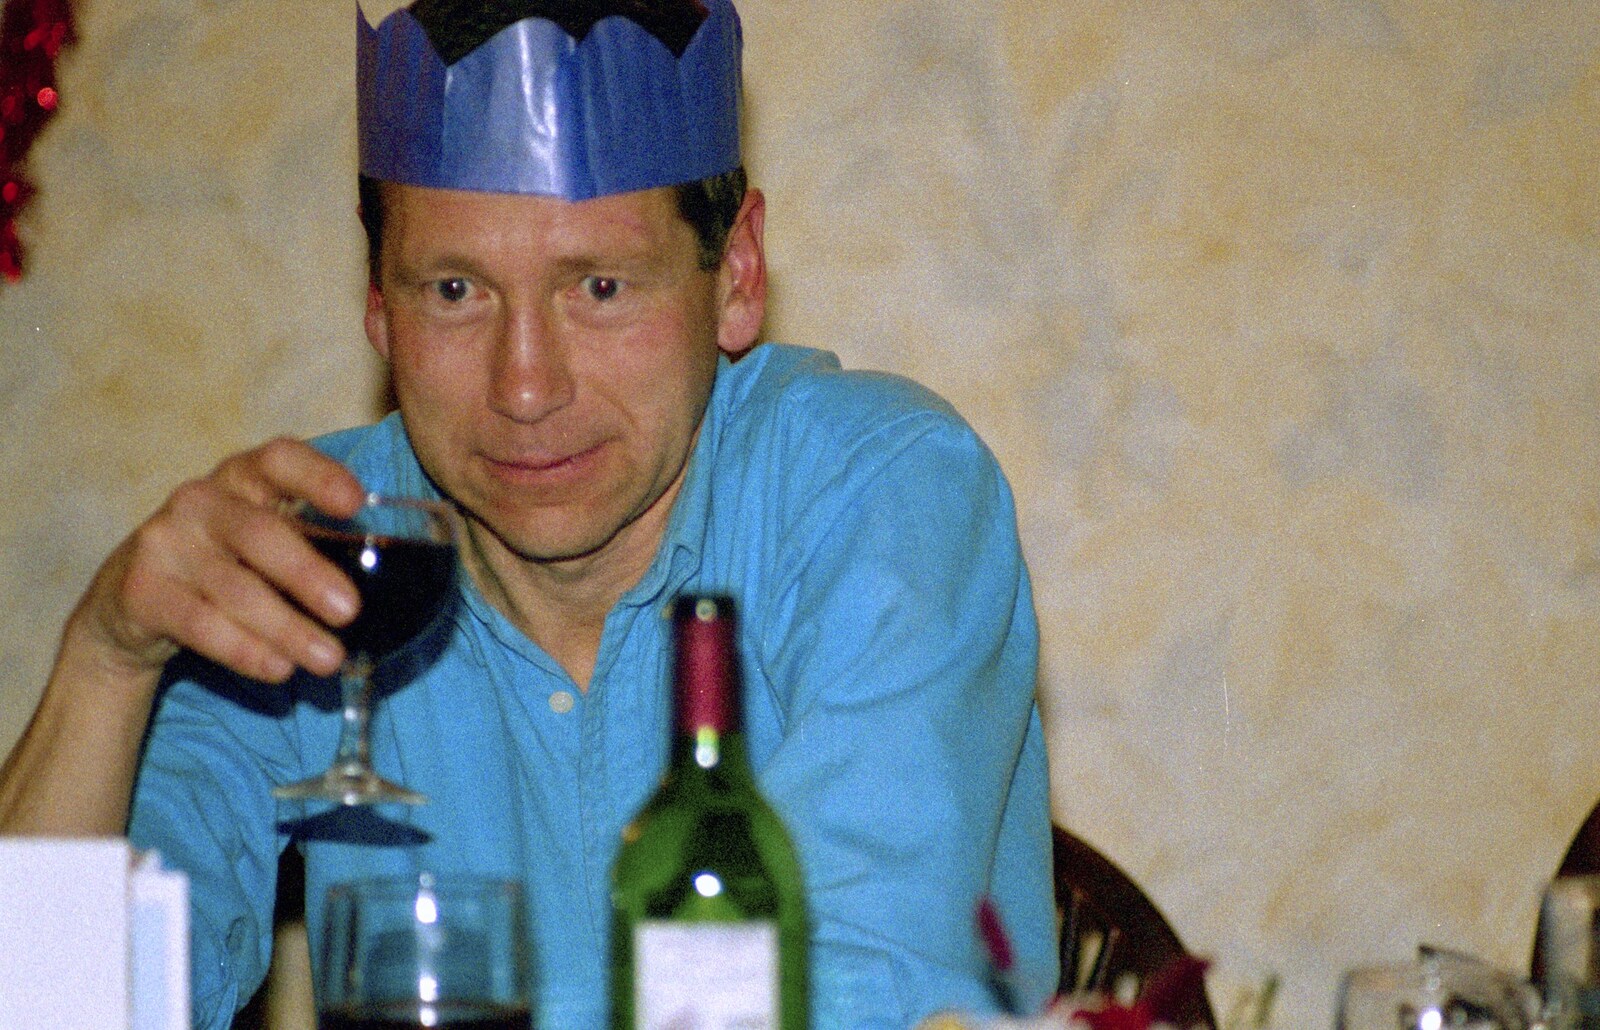 Apple looks faintly desperate from The BSCC Christmas Dinner, The Swan Inn, Brome, Suffolk - 8th December 2000